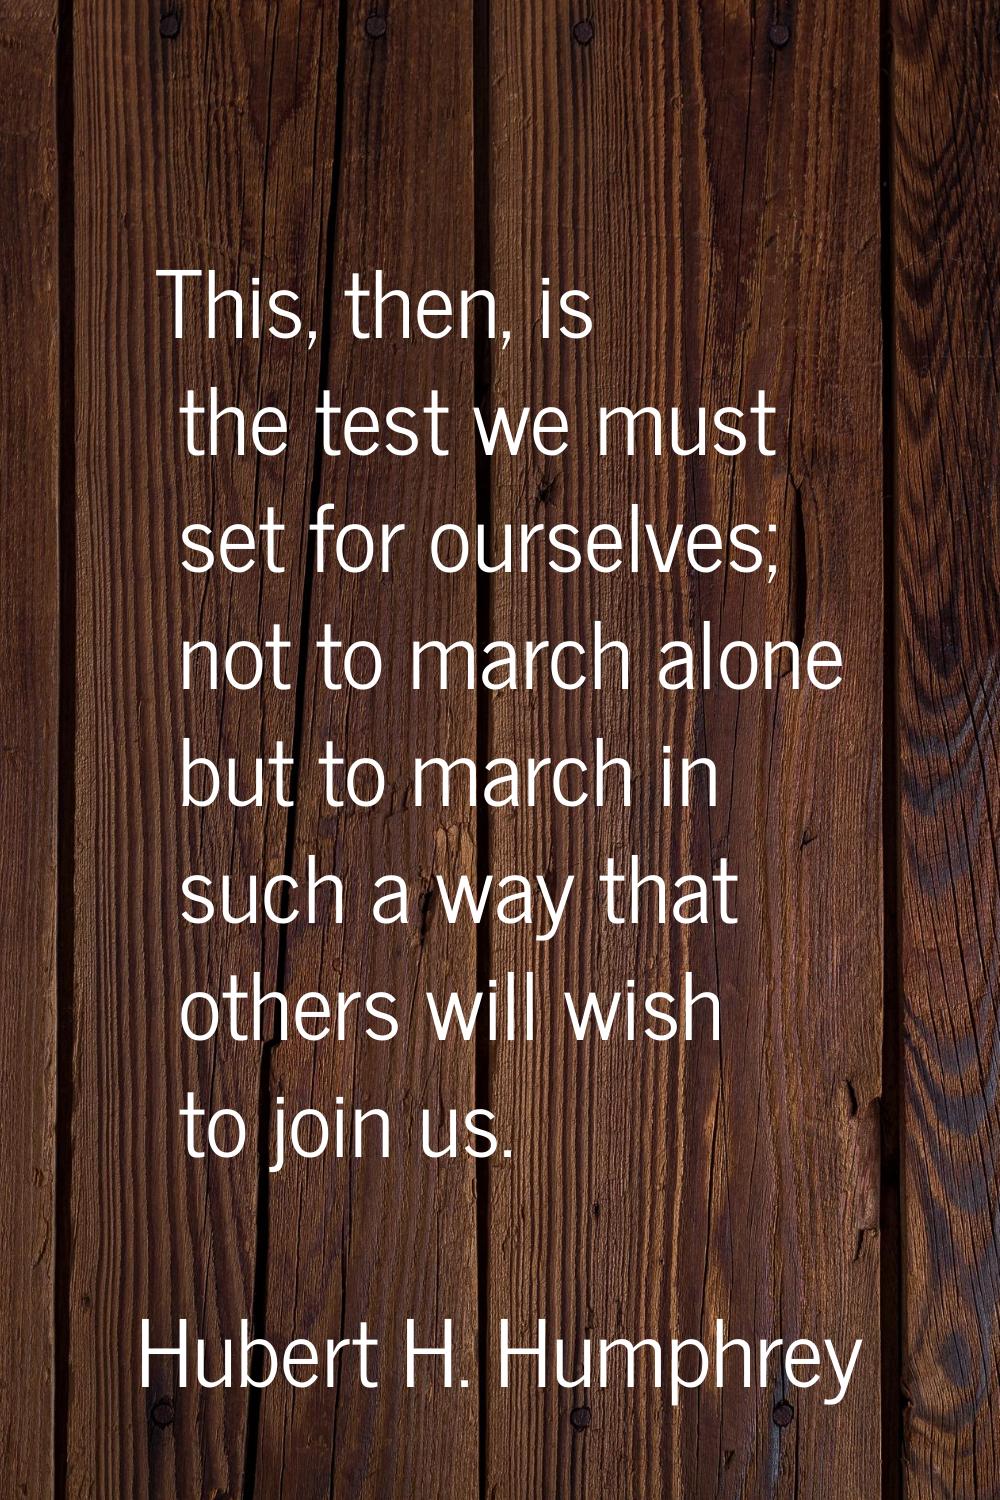 This, then, is the test we must set for ourselves; not to march alone but to march in such a way th